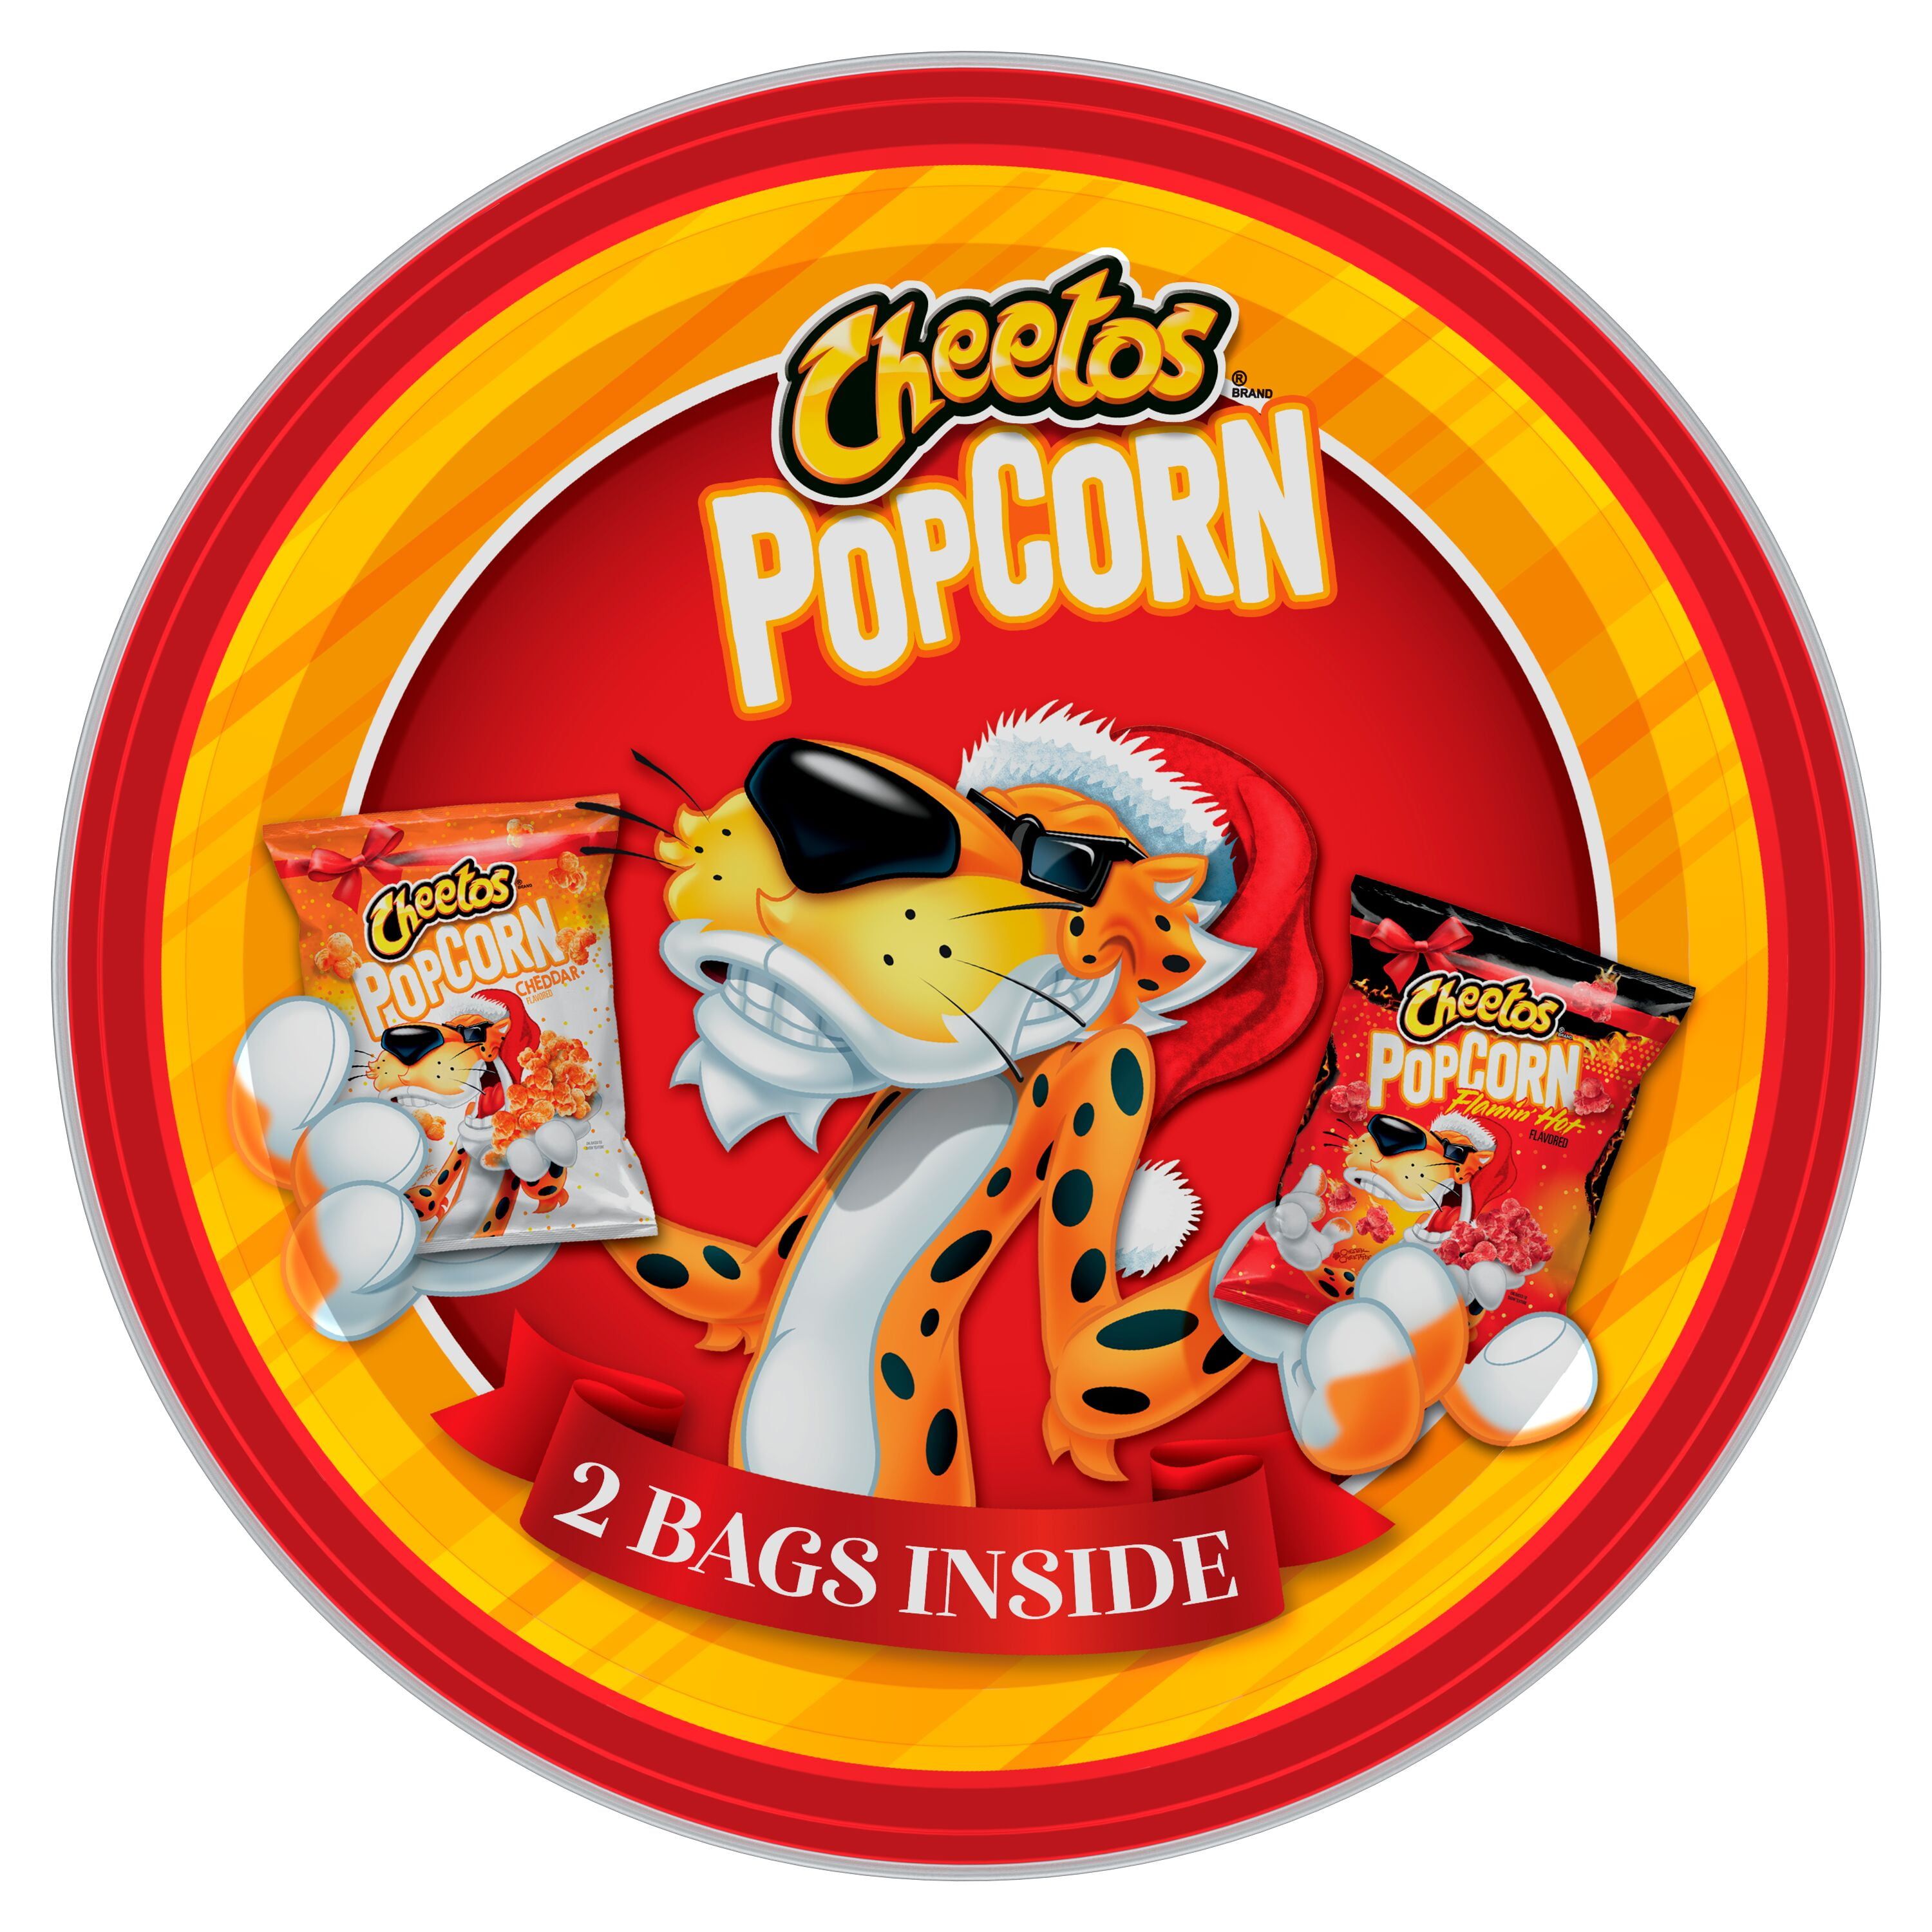 Cheetos Popcorn – The New Cheetos Popcorn That's Infused With